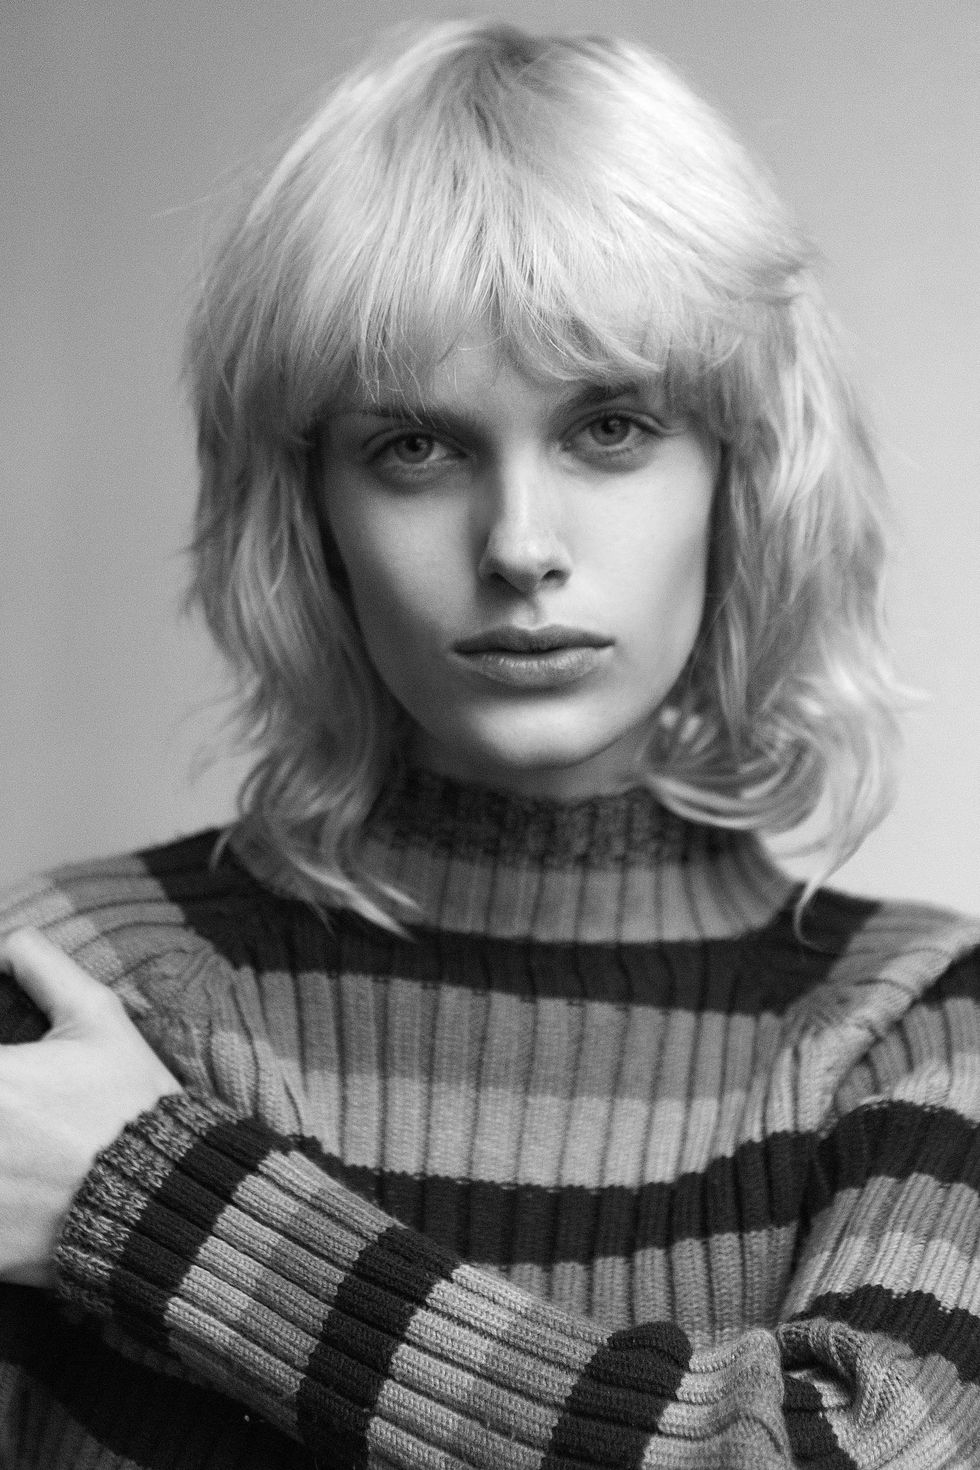 Lip, Hairstyle, Sweater, Style, Monochrome, Bangs, Monochrome photography, Wool, Black-and-white, Knitting, 